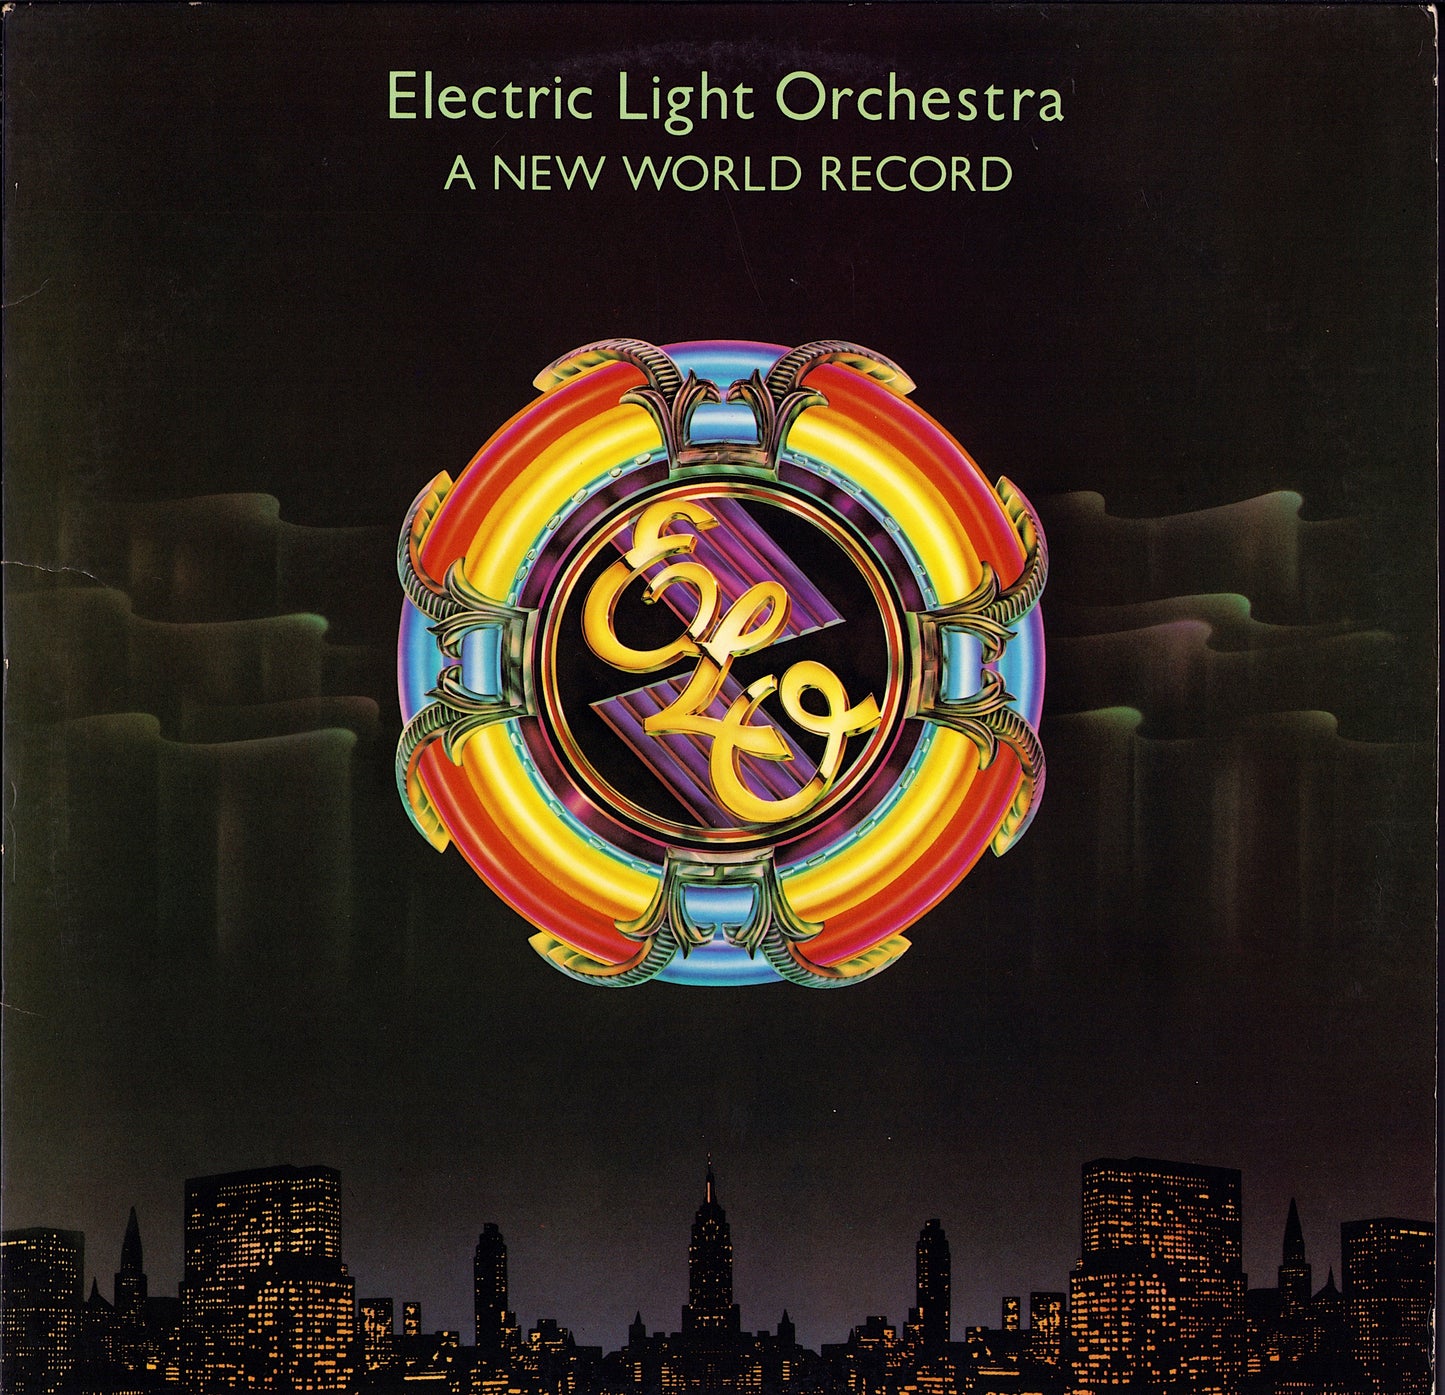 Electric Light Orchestra ‎- A New World Record Vinyl LP US